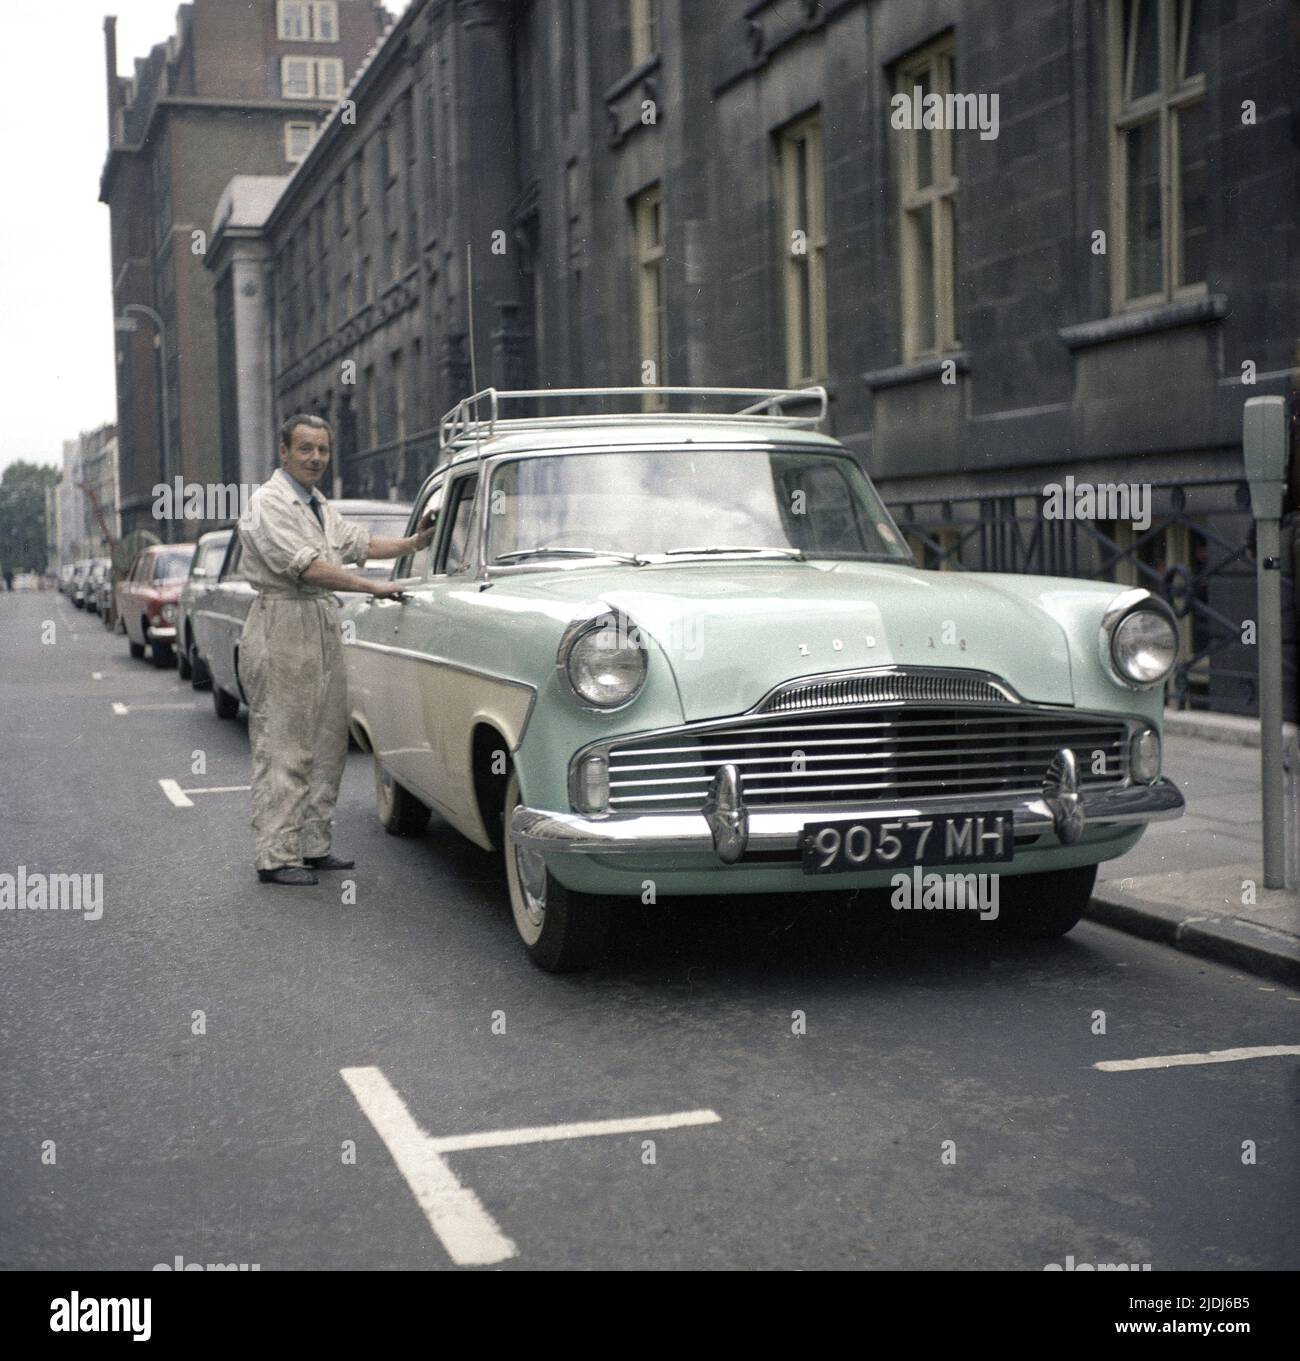 1964, historical, a man in his work overalls standing by his car of the era, a tone-tone, Ford Zodiac, parked in a street, England, UK Stock Photo